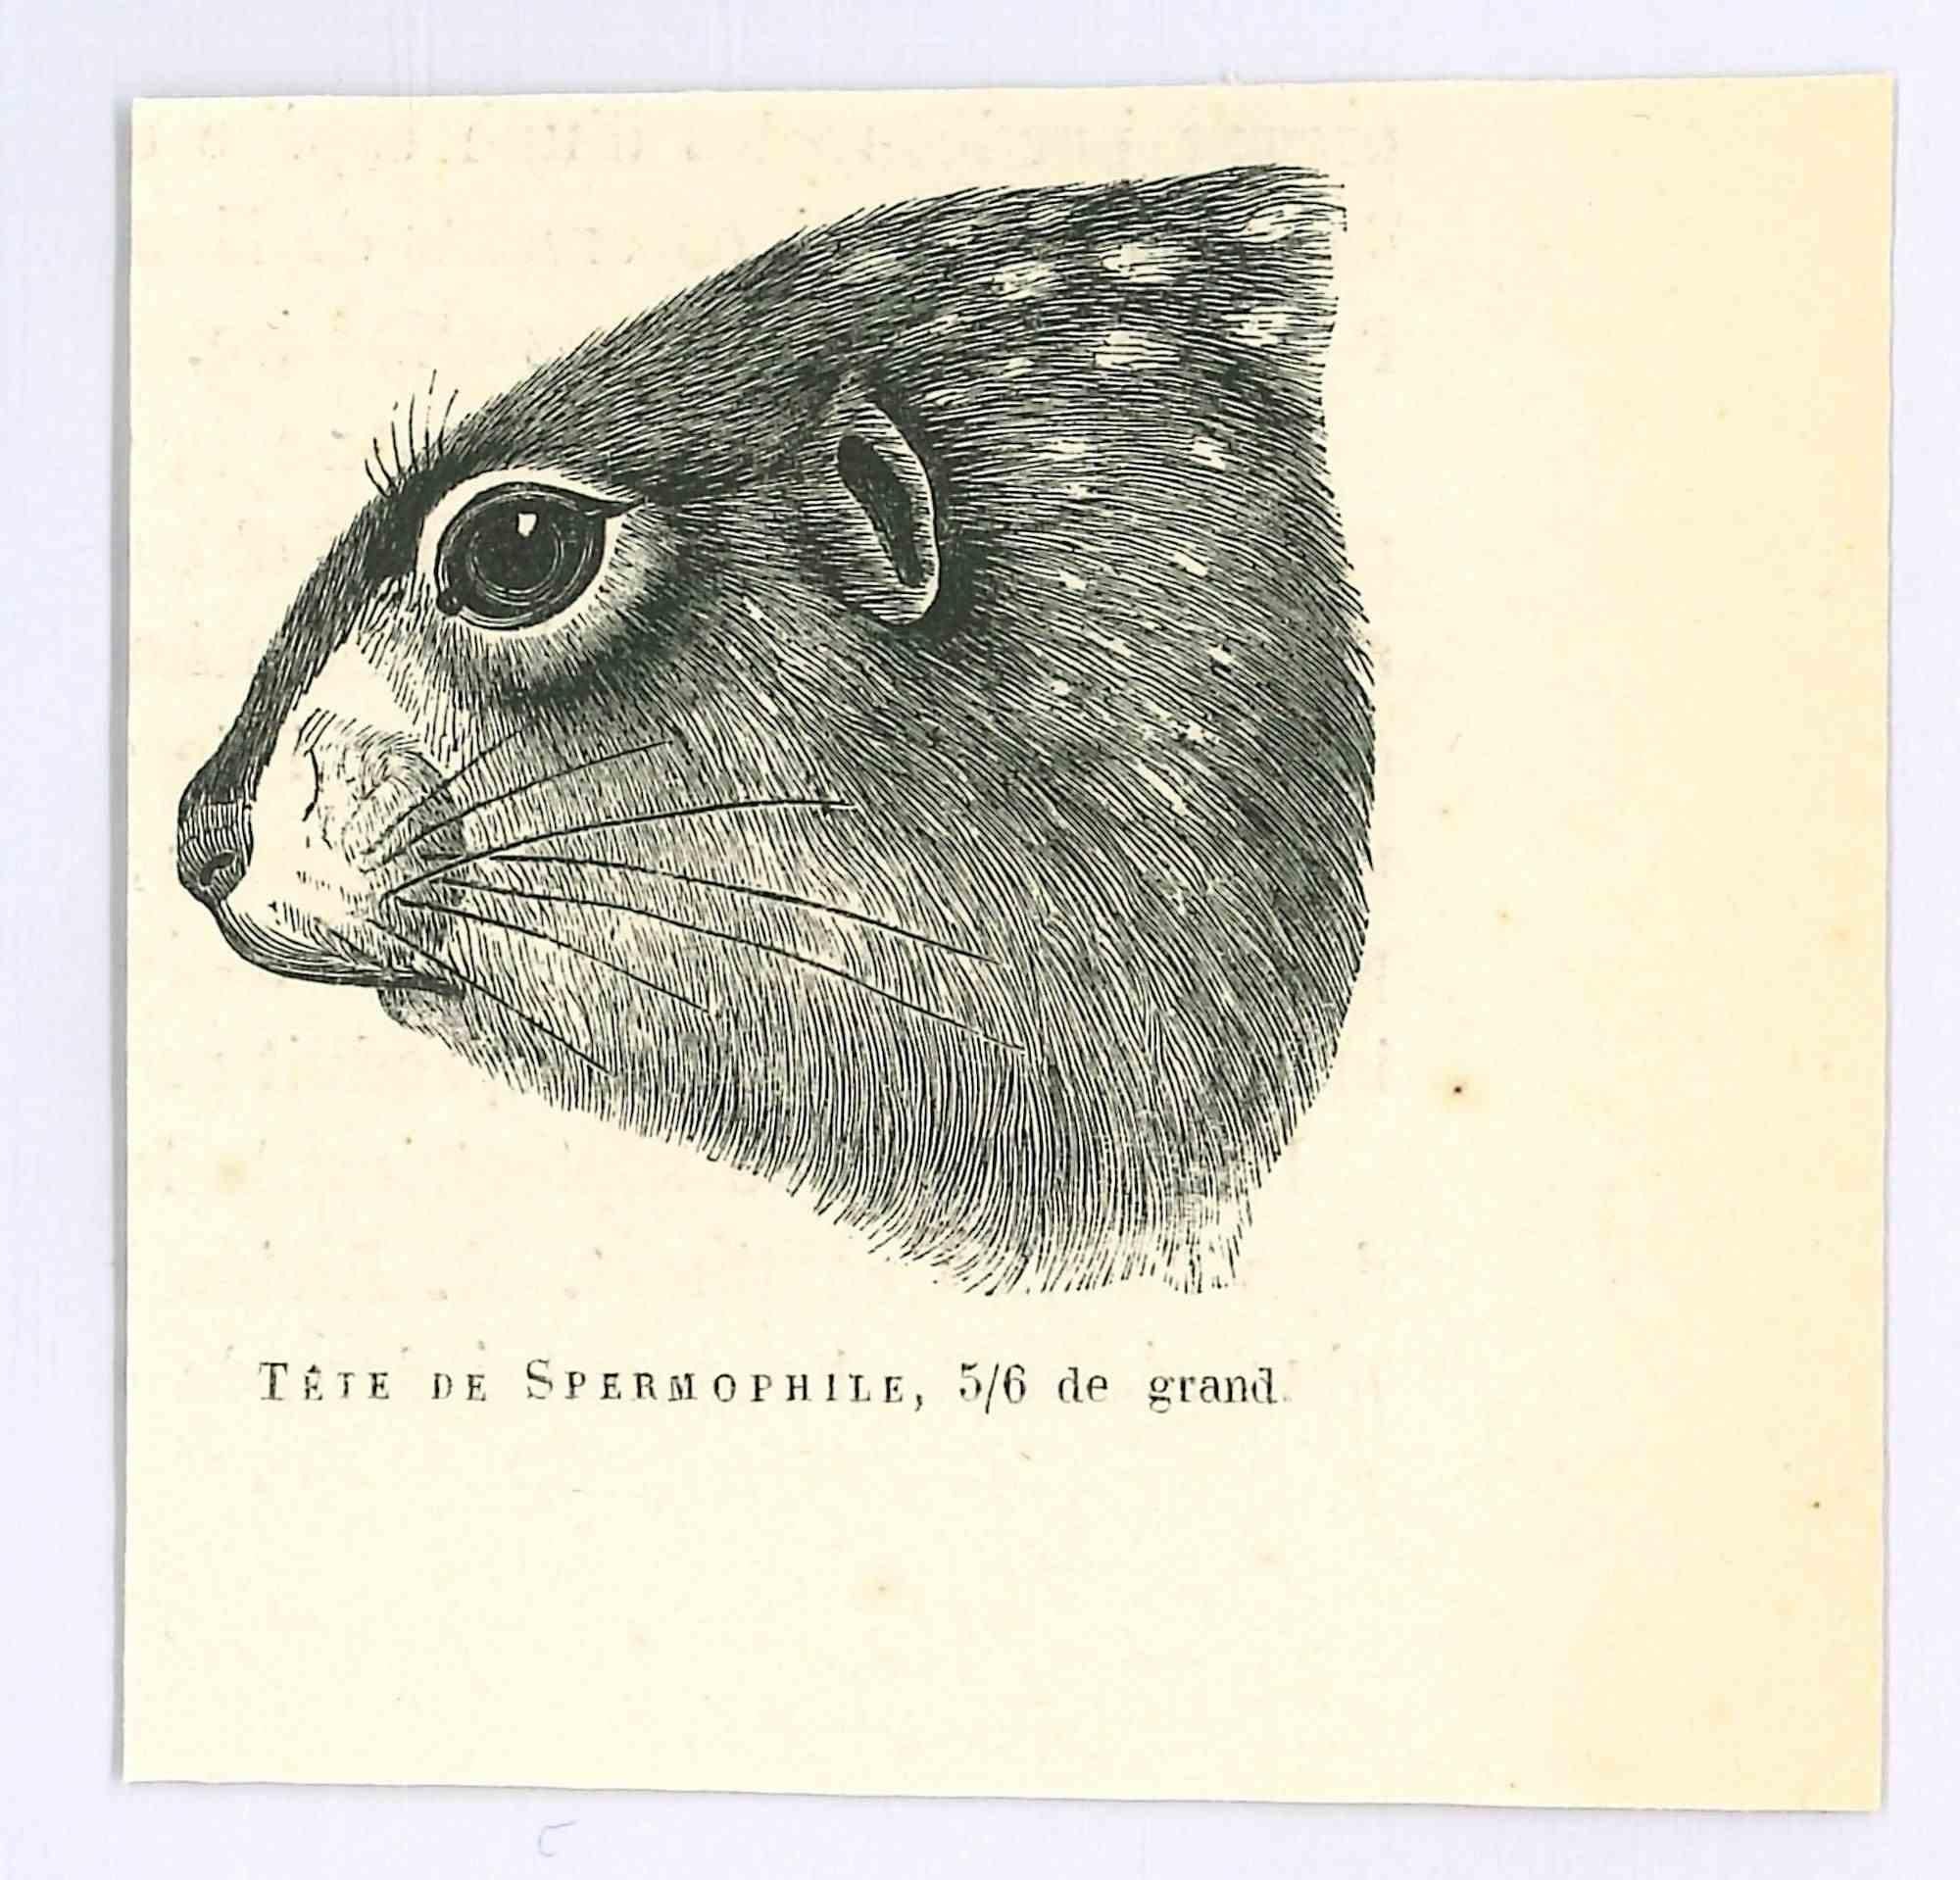 Spermophilus is an original lithograph on ivory-colored paper, realized by Paul Gervais (1816-1879). The artwork is from The Series of "Les Trois Règnes de la Nature", and was published in 1854.

Good conditions.

Titled on the lower. With the notes